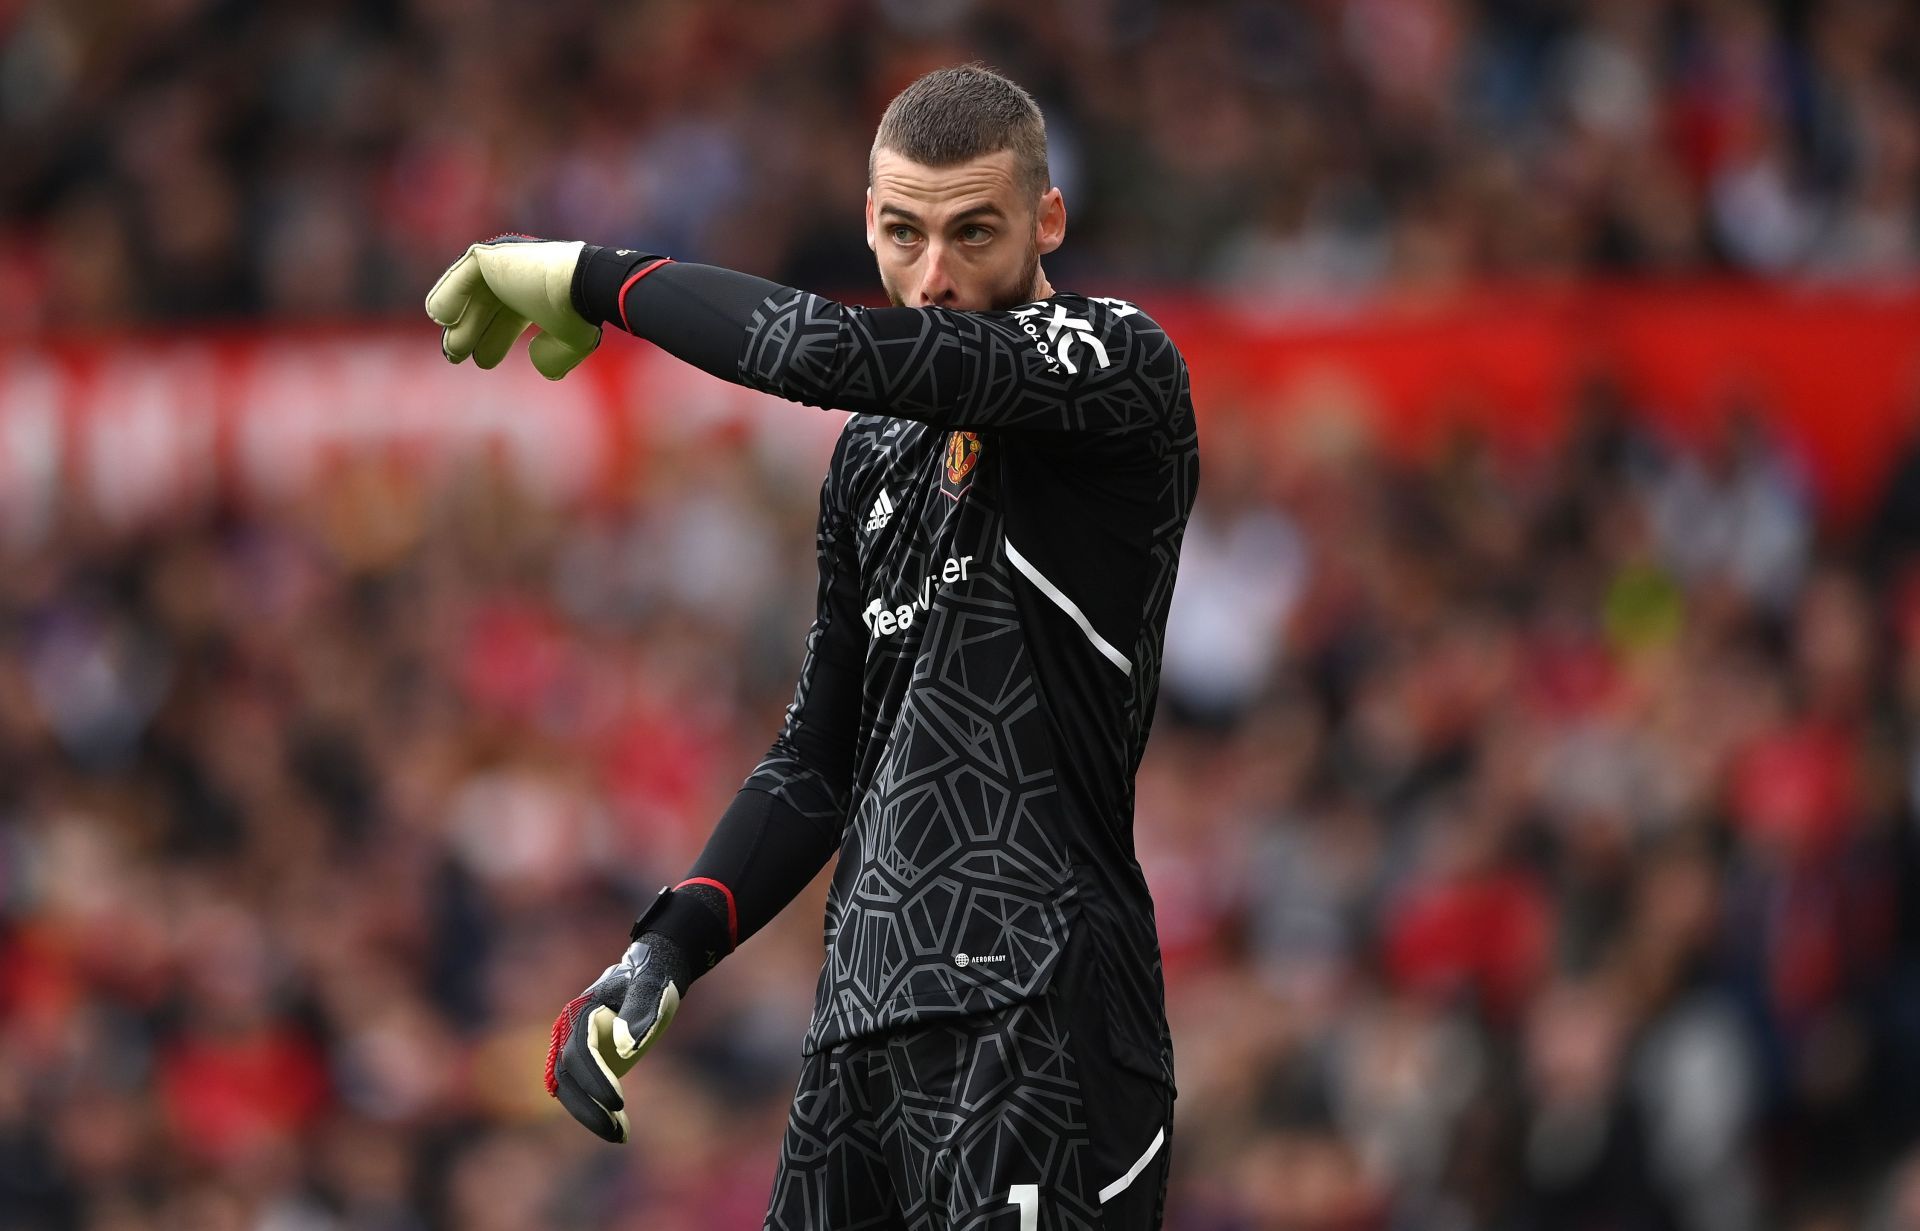 David de Gea has been an omnipresent figure between the sticks at Old Trafford this season.